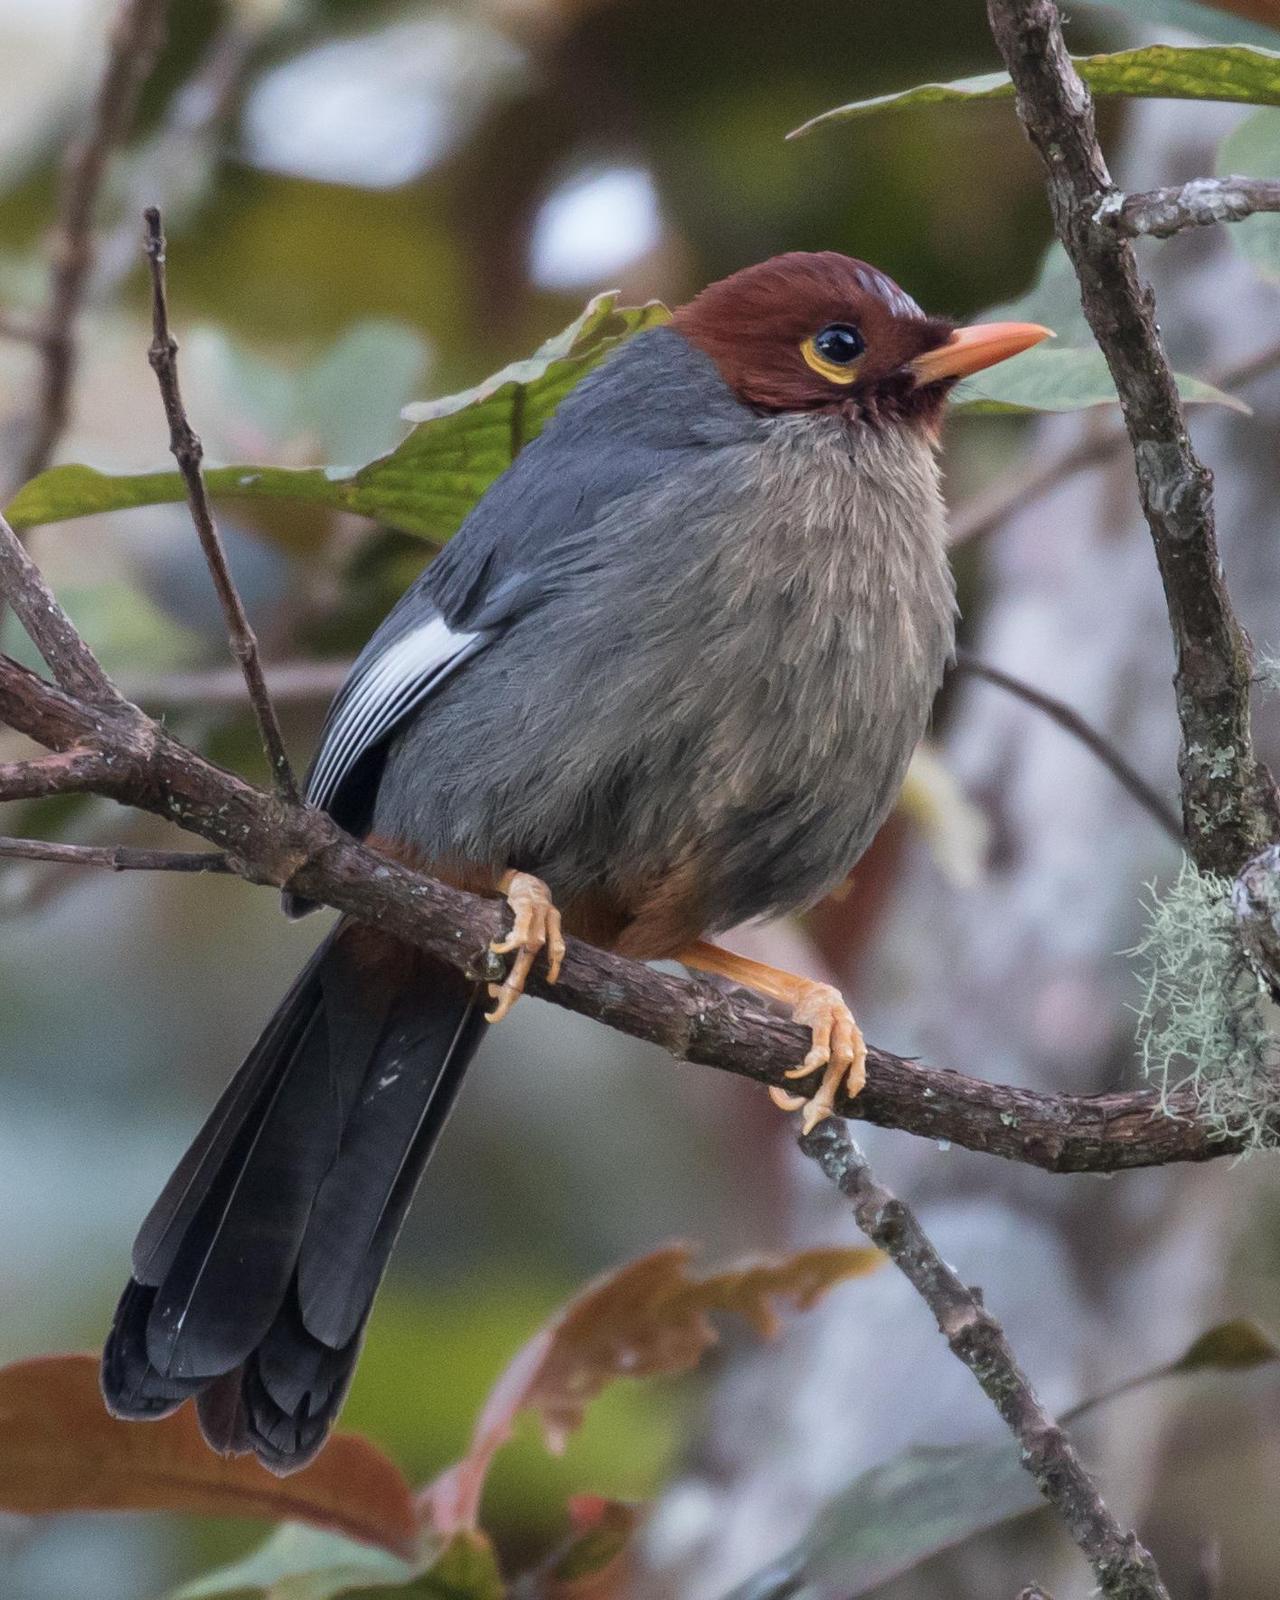 Chestnut-hooded Laughingthrush Photo by Robert Lewis